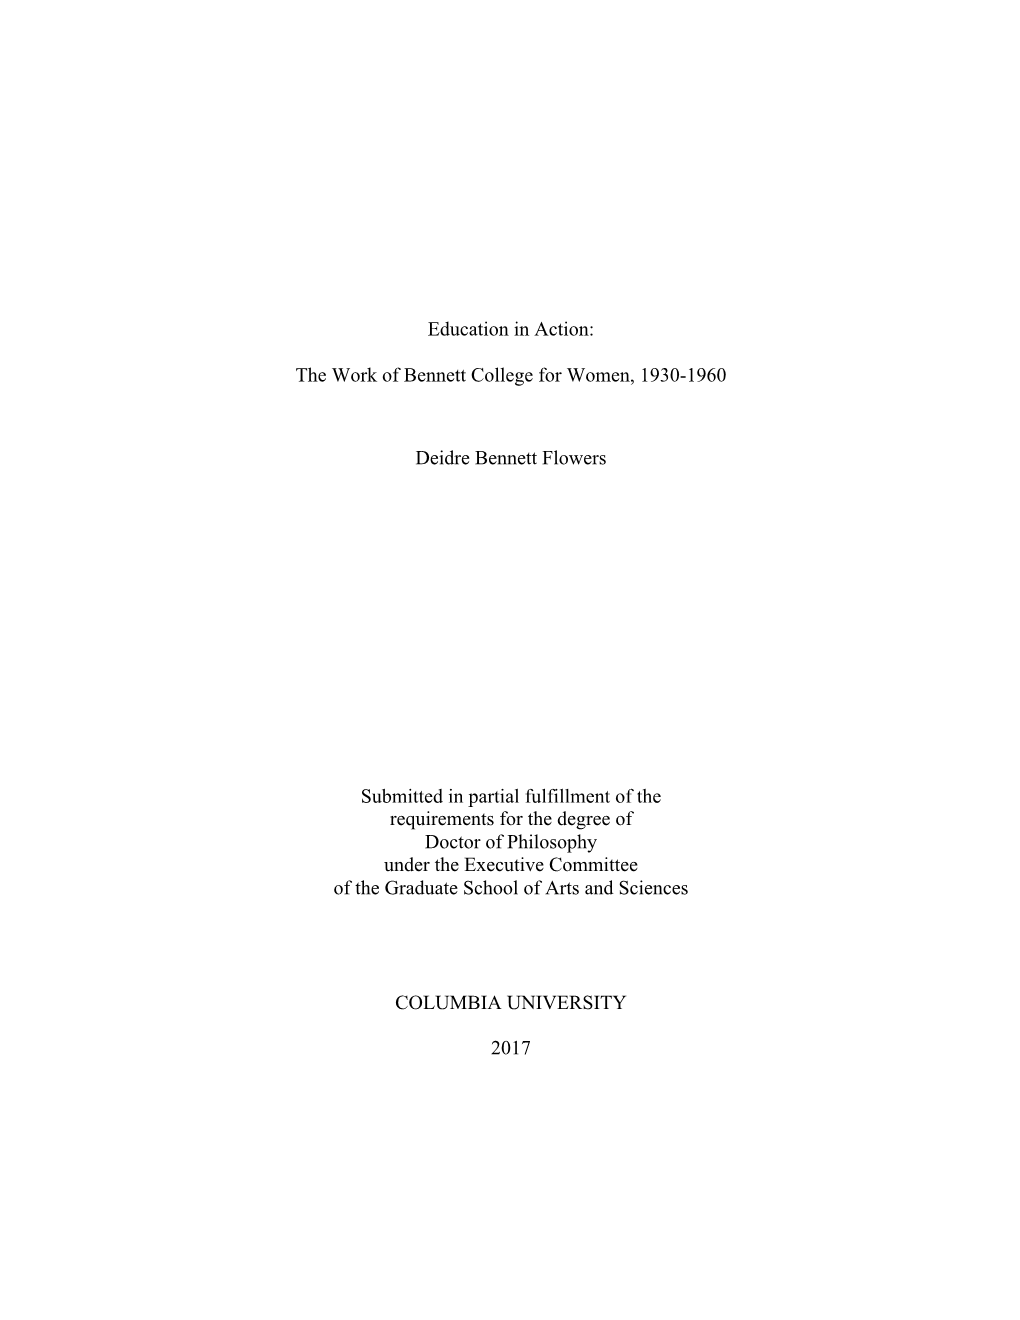 Education in Action: the Work of Bennett College for Women, 1930-1960 Deidre Bennett Flowers Submitted in Partial Fulfillment Of